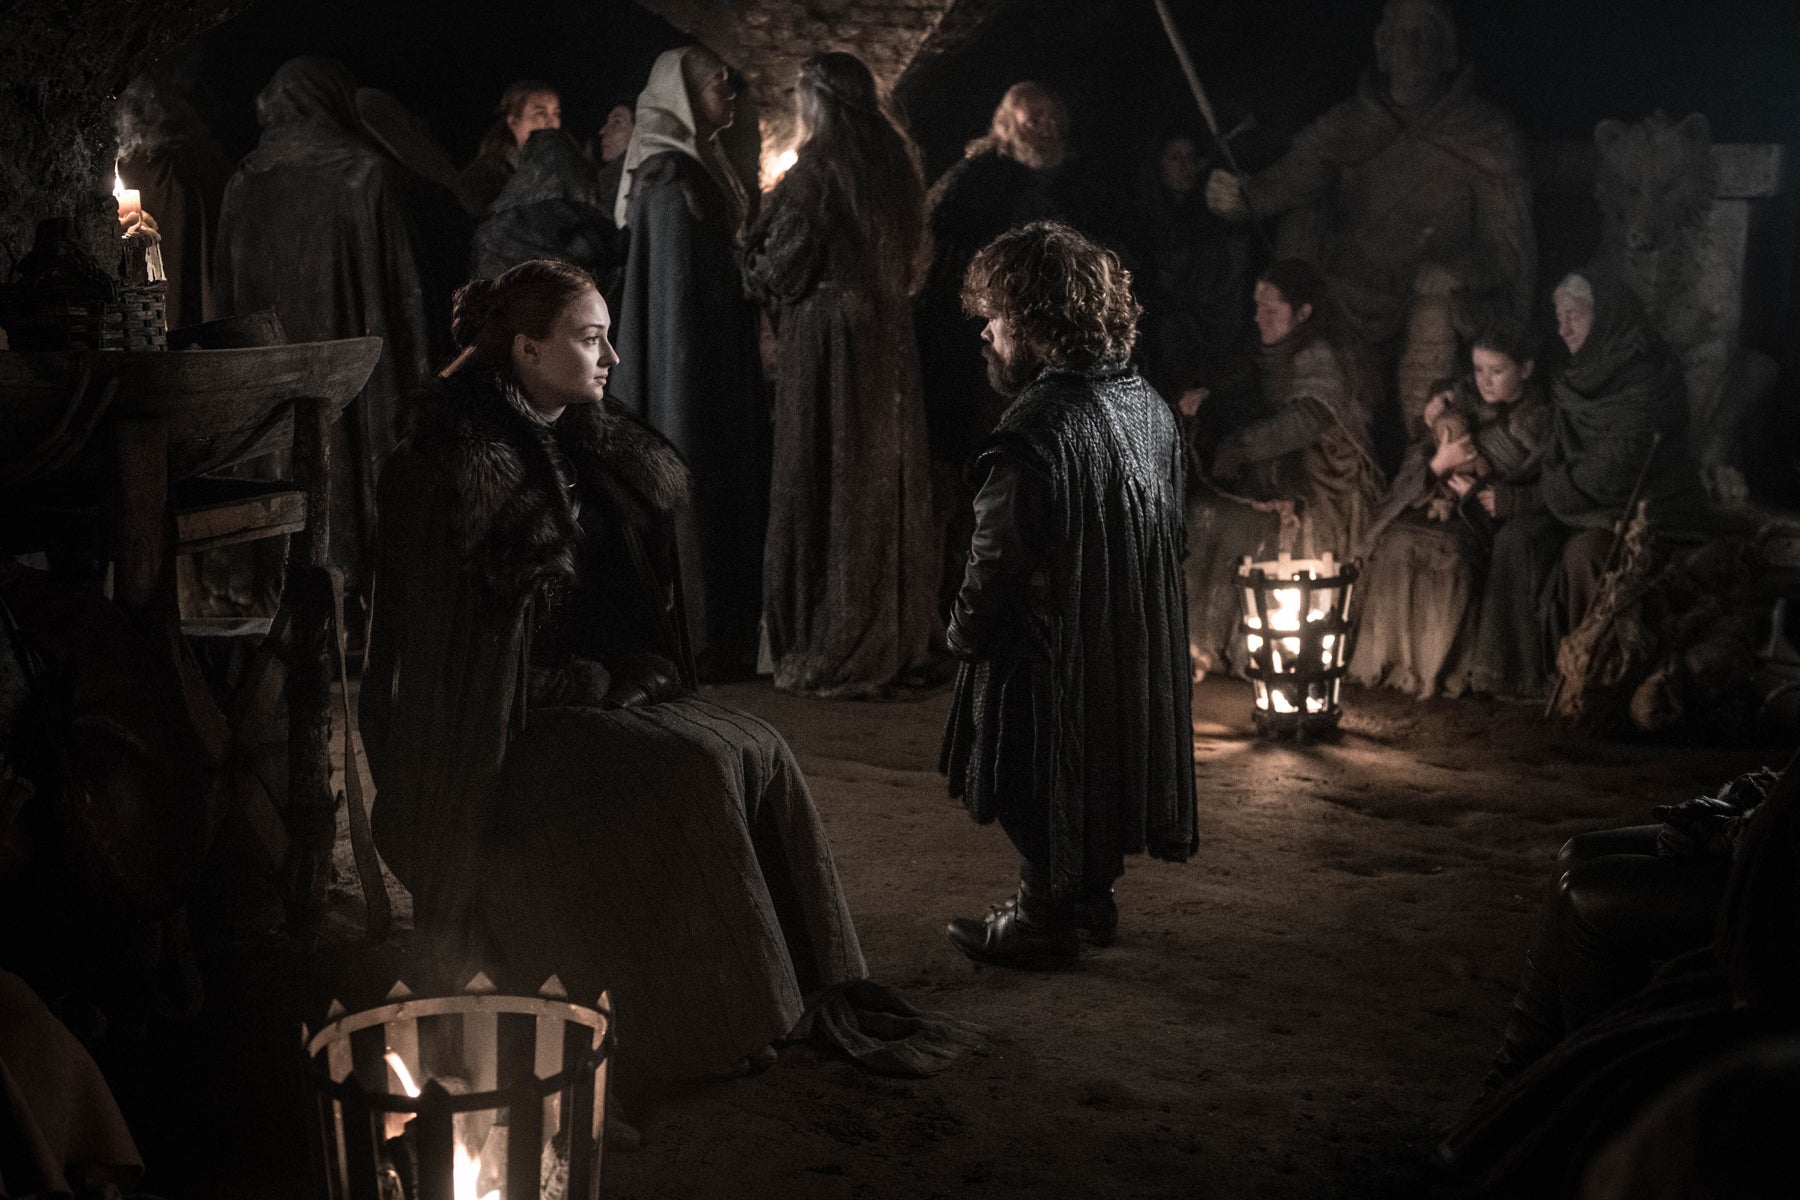 Sansa Stark is seated and facing Tyrion Lannister in the crypts of Winterfell, where women and children sit and stand in the background.